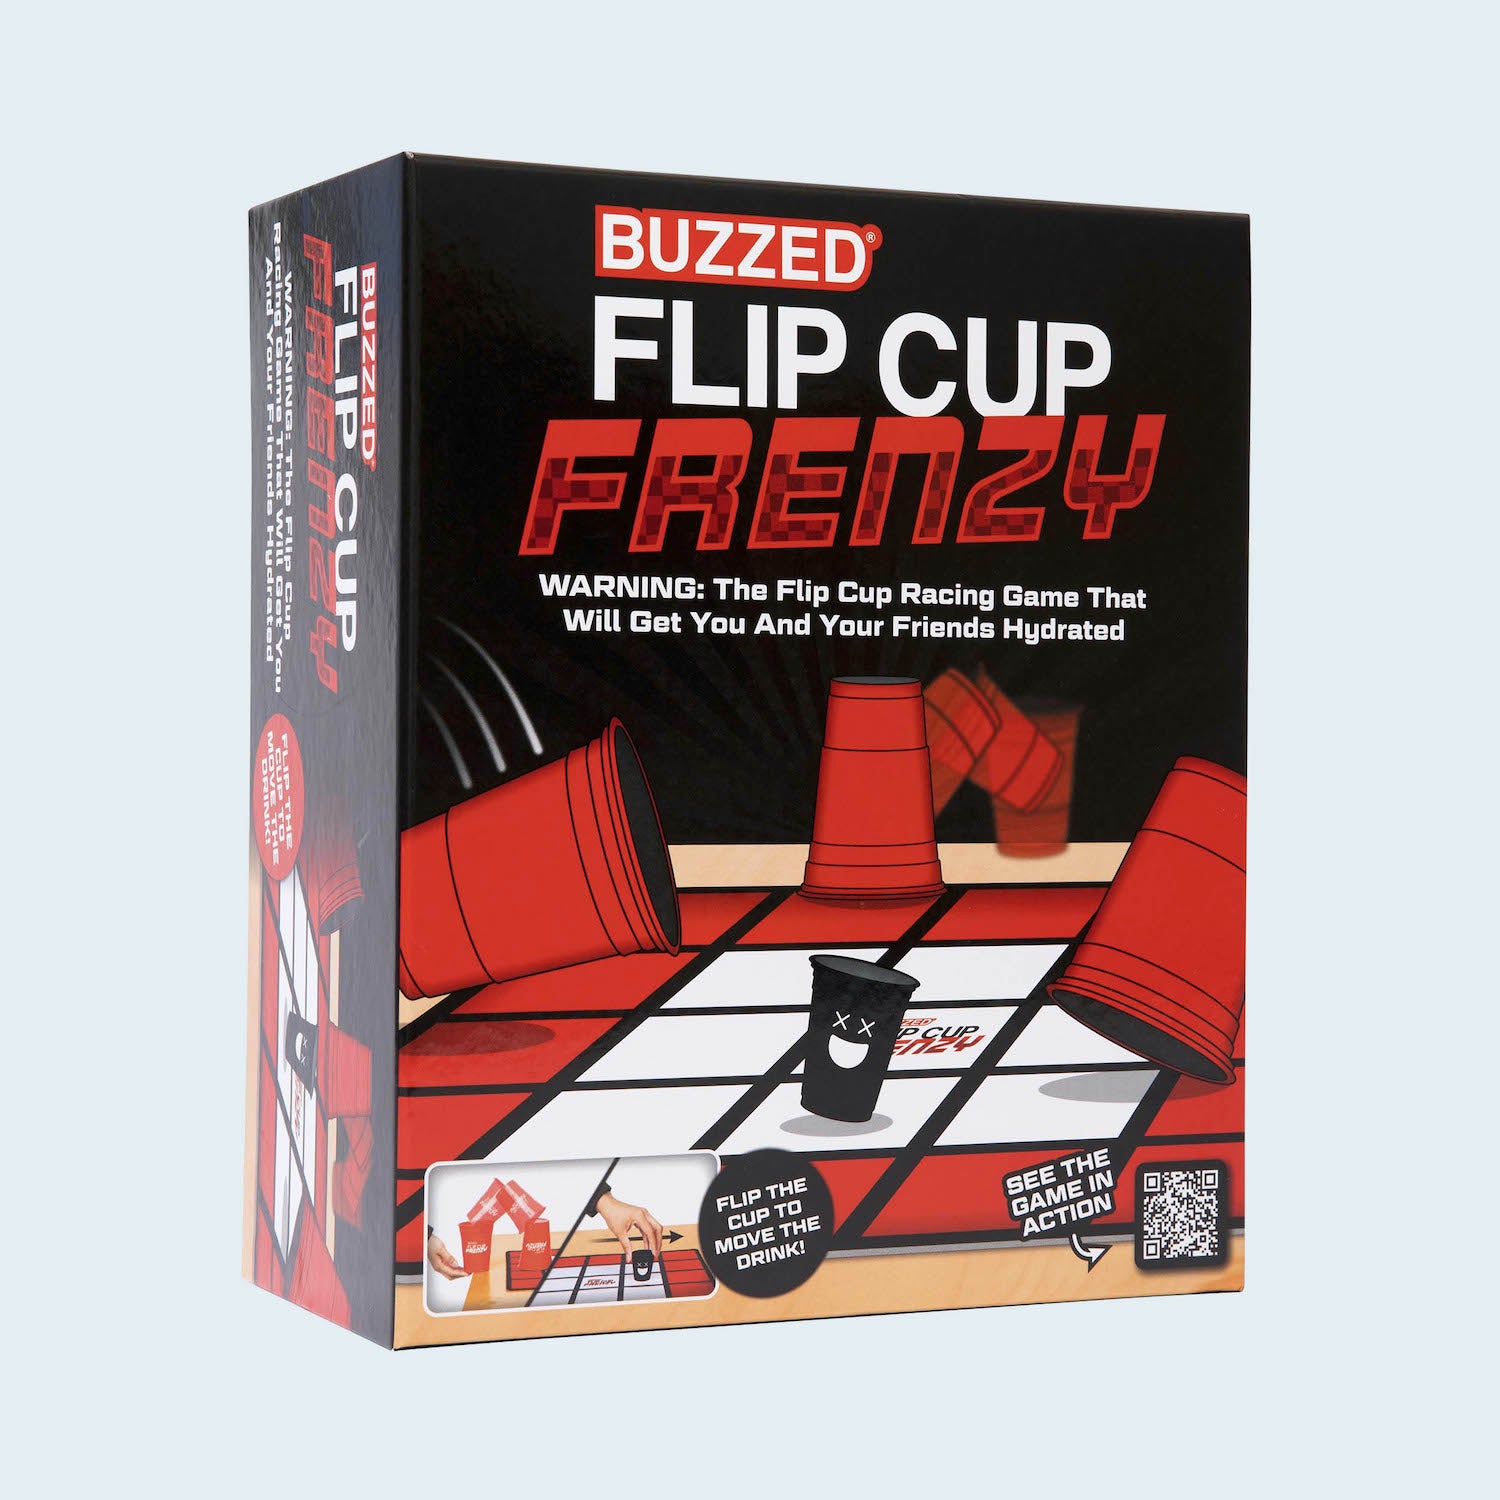 buzzed-flip-cup-frenzy-game-box-and-game-play-01-what-do-you-meme-by-relatable